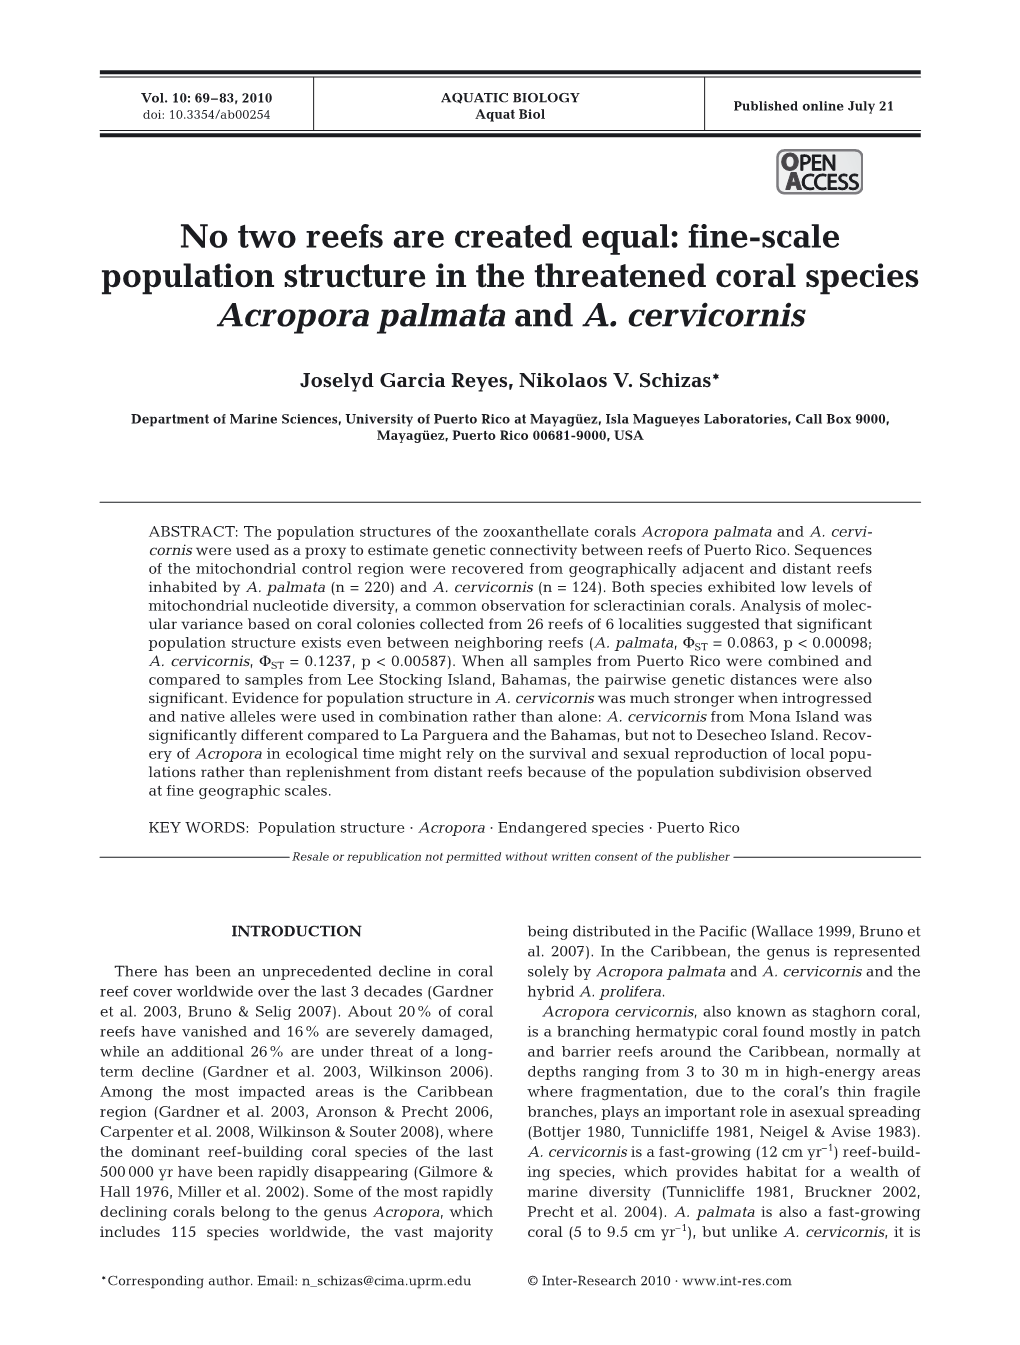 No Two Reefs Are Created Equal: Fine-Scale Population Structure in the Threatened Coral Species Acropora Palmata and A